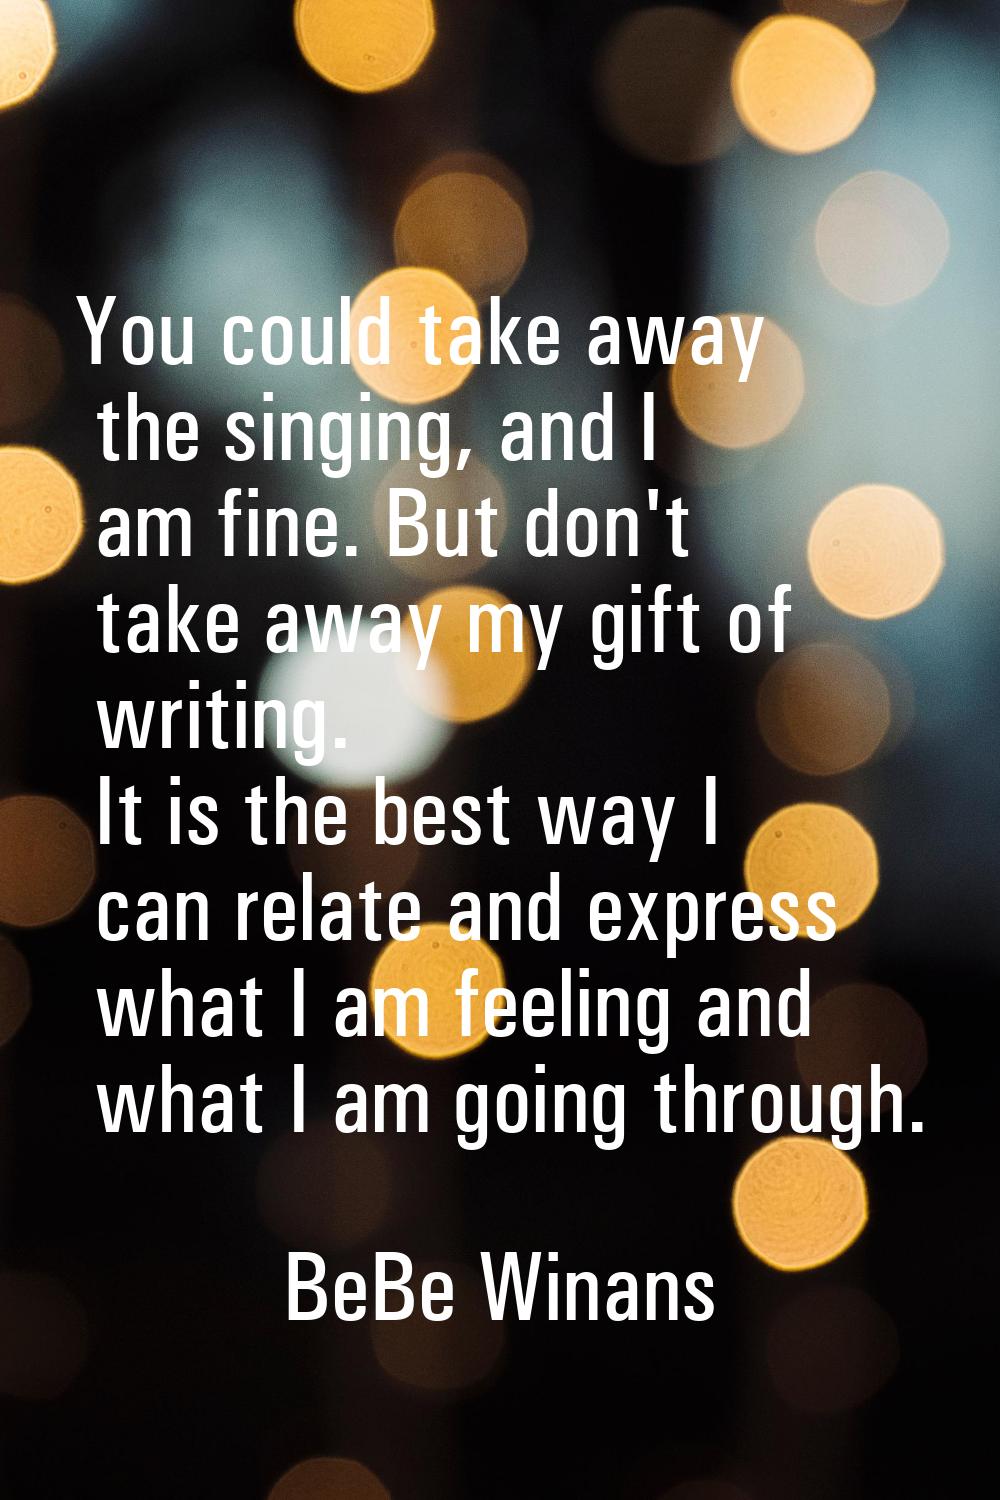 You could take away the singing, and I am fine. But don't take away my gift of writing. It is the b